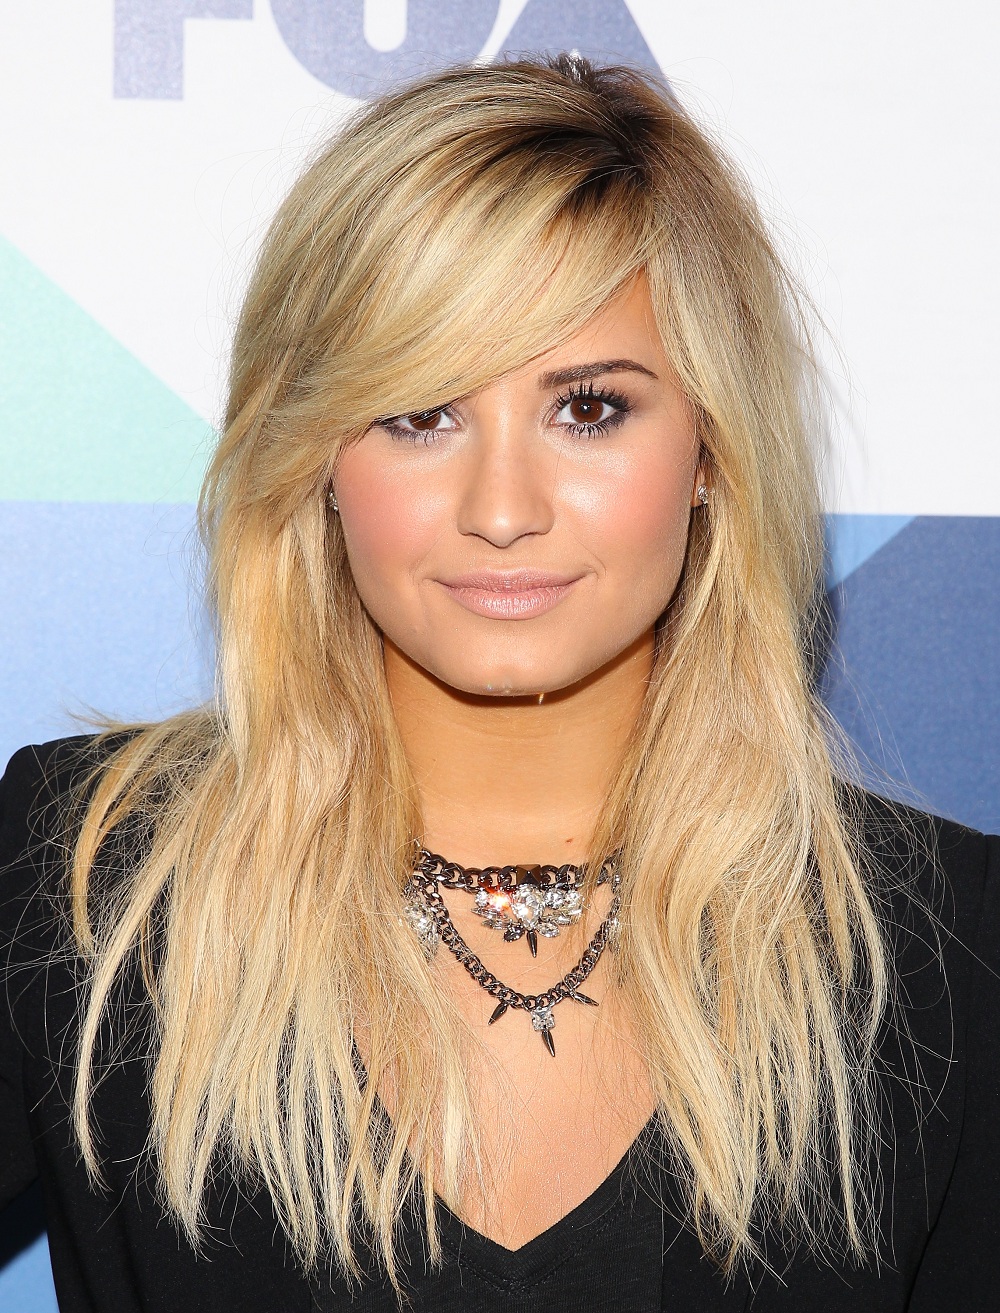 http://img2.wikia.nocookie.net/__cb20140421211104/the-x-factor-usa/images/1/14/Demi_Lovato.jpg